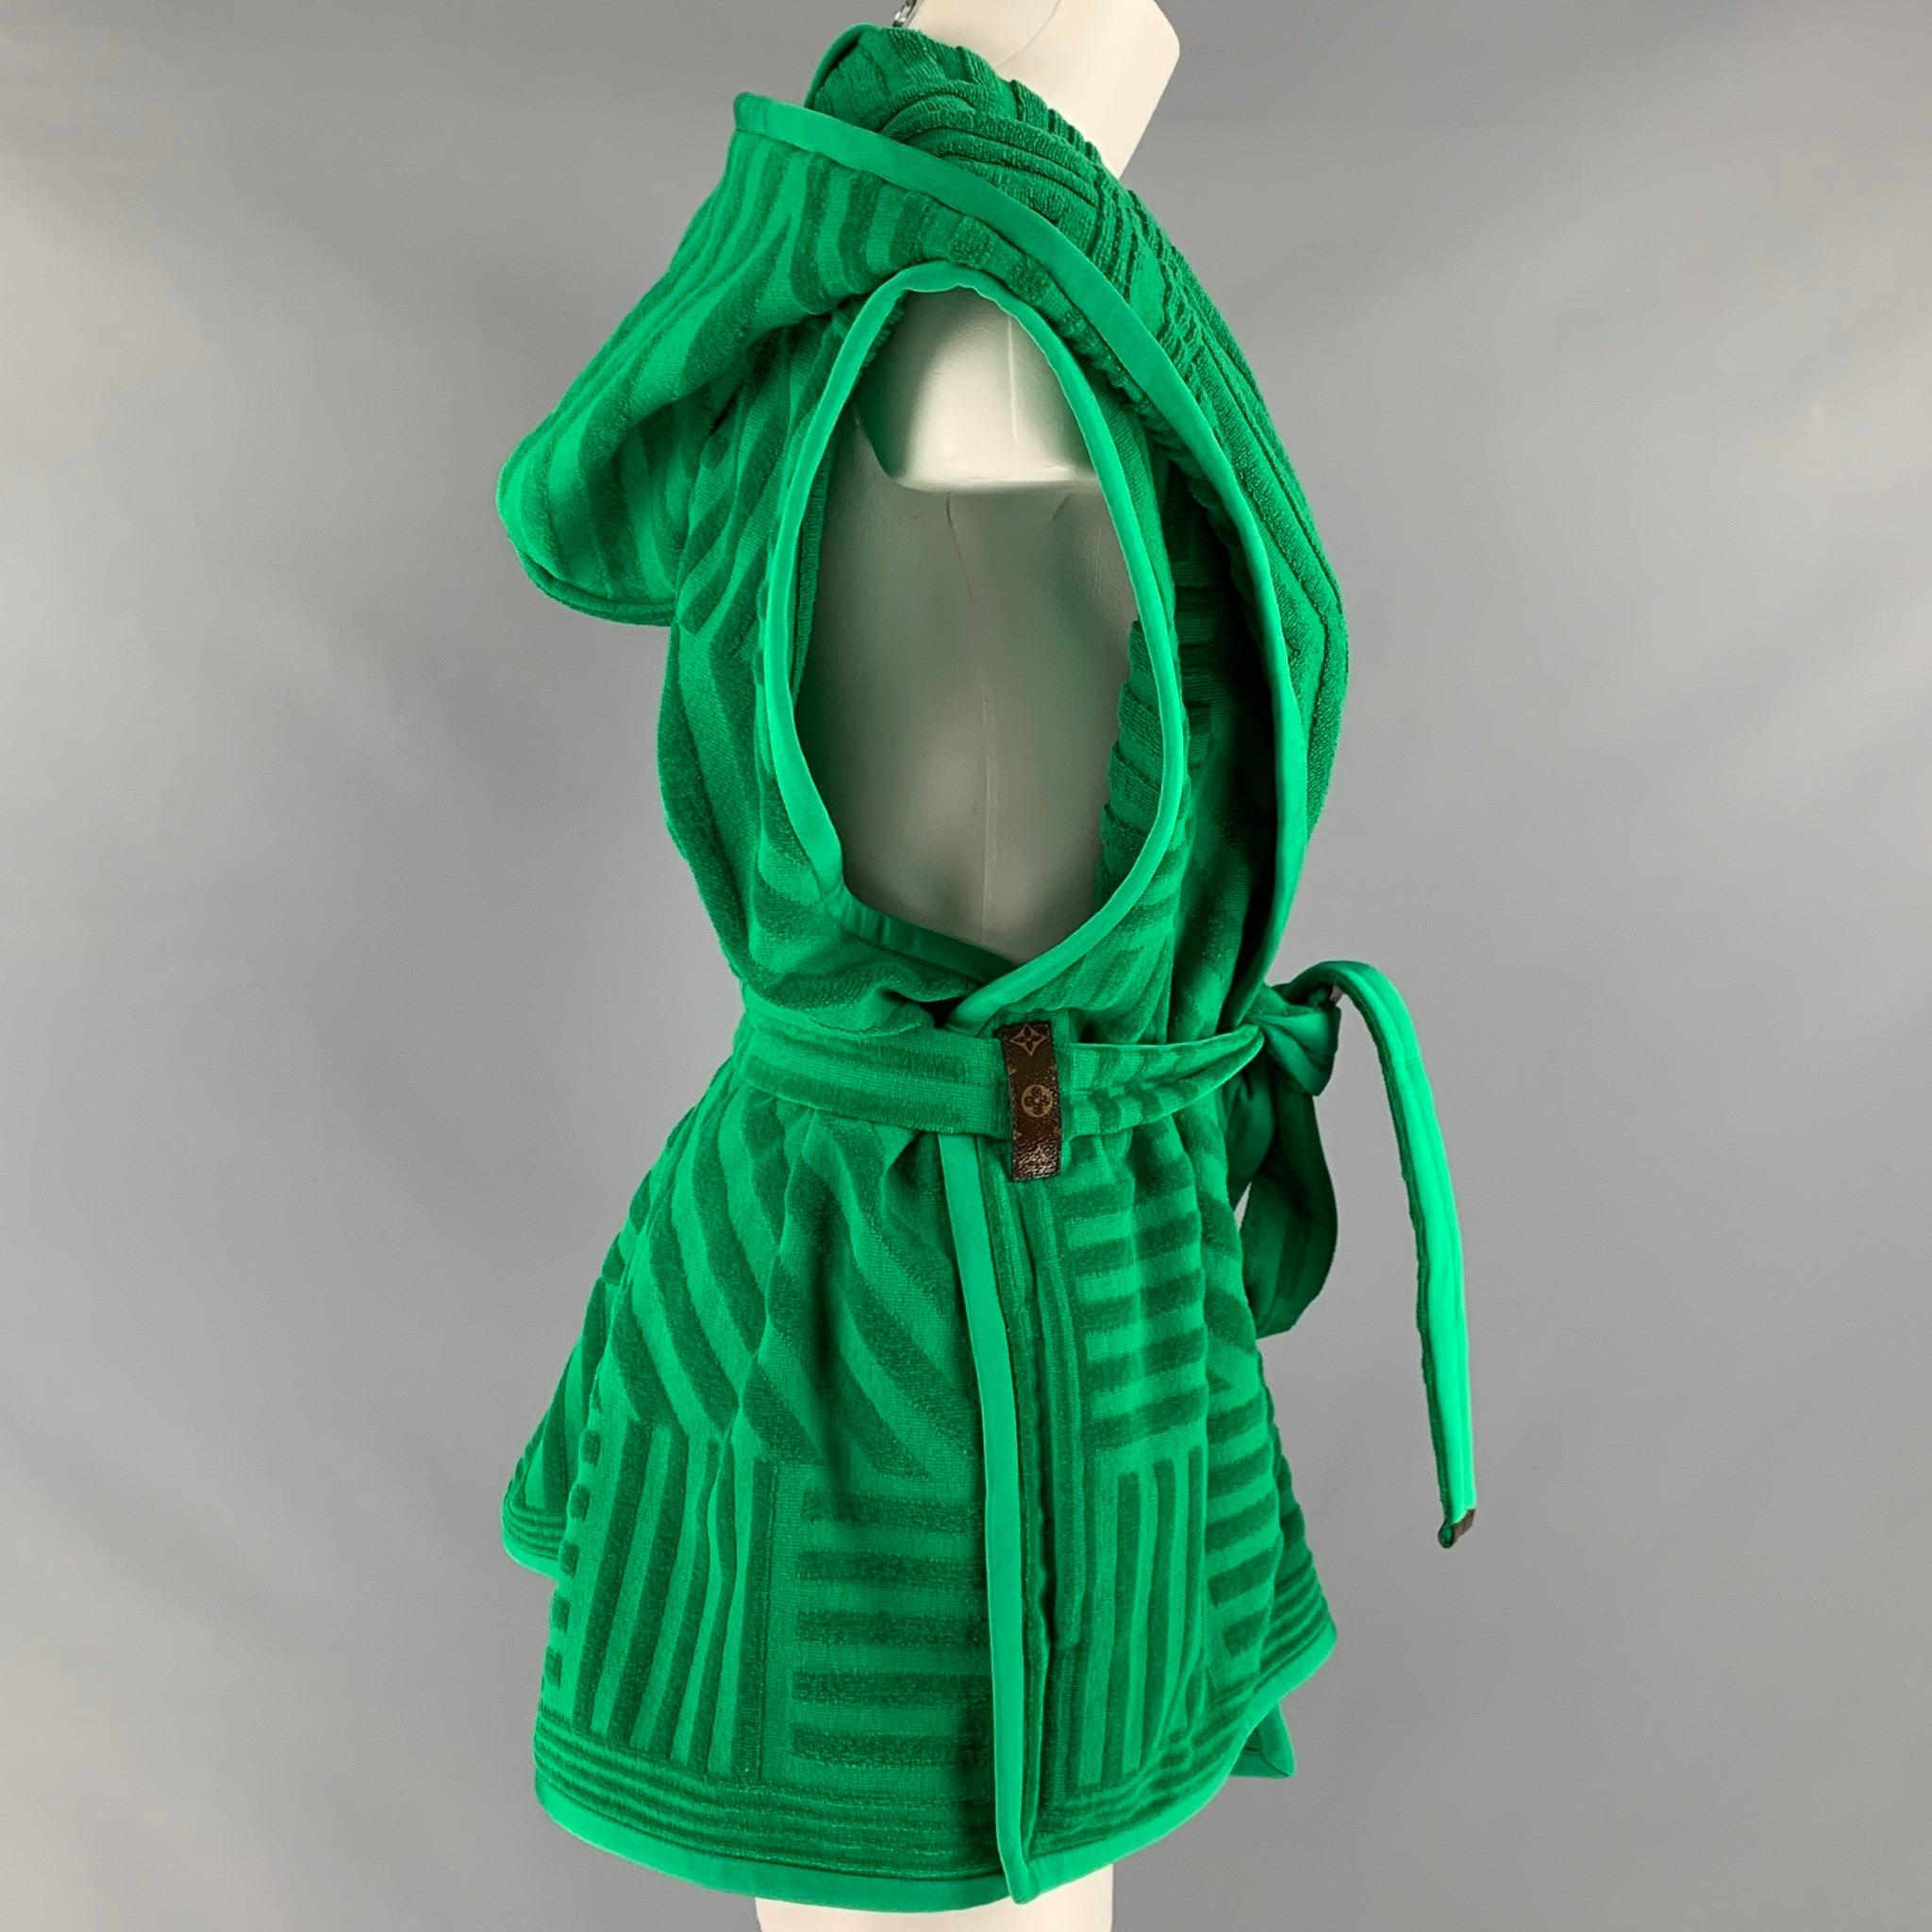 LOUIS VUITTON Stardust resort 2022 bath robe comes in a green cotton french terry jacquard material featuring a green knit accents, hooded style, belted
 and slit pockets. Made in France.Excellent Pre-Owned Condition.  

Marked:   38 

Measurements: